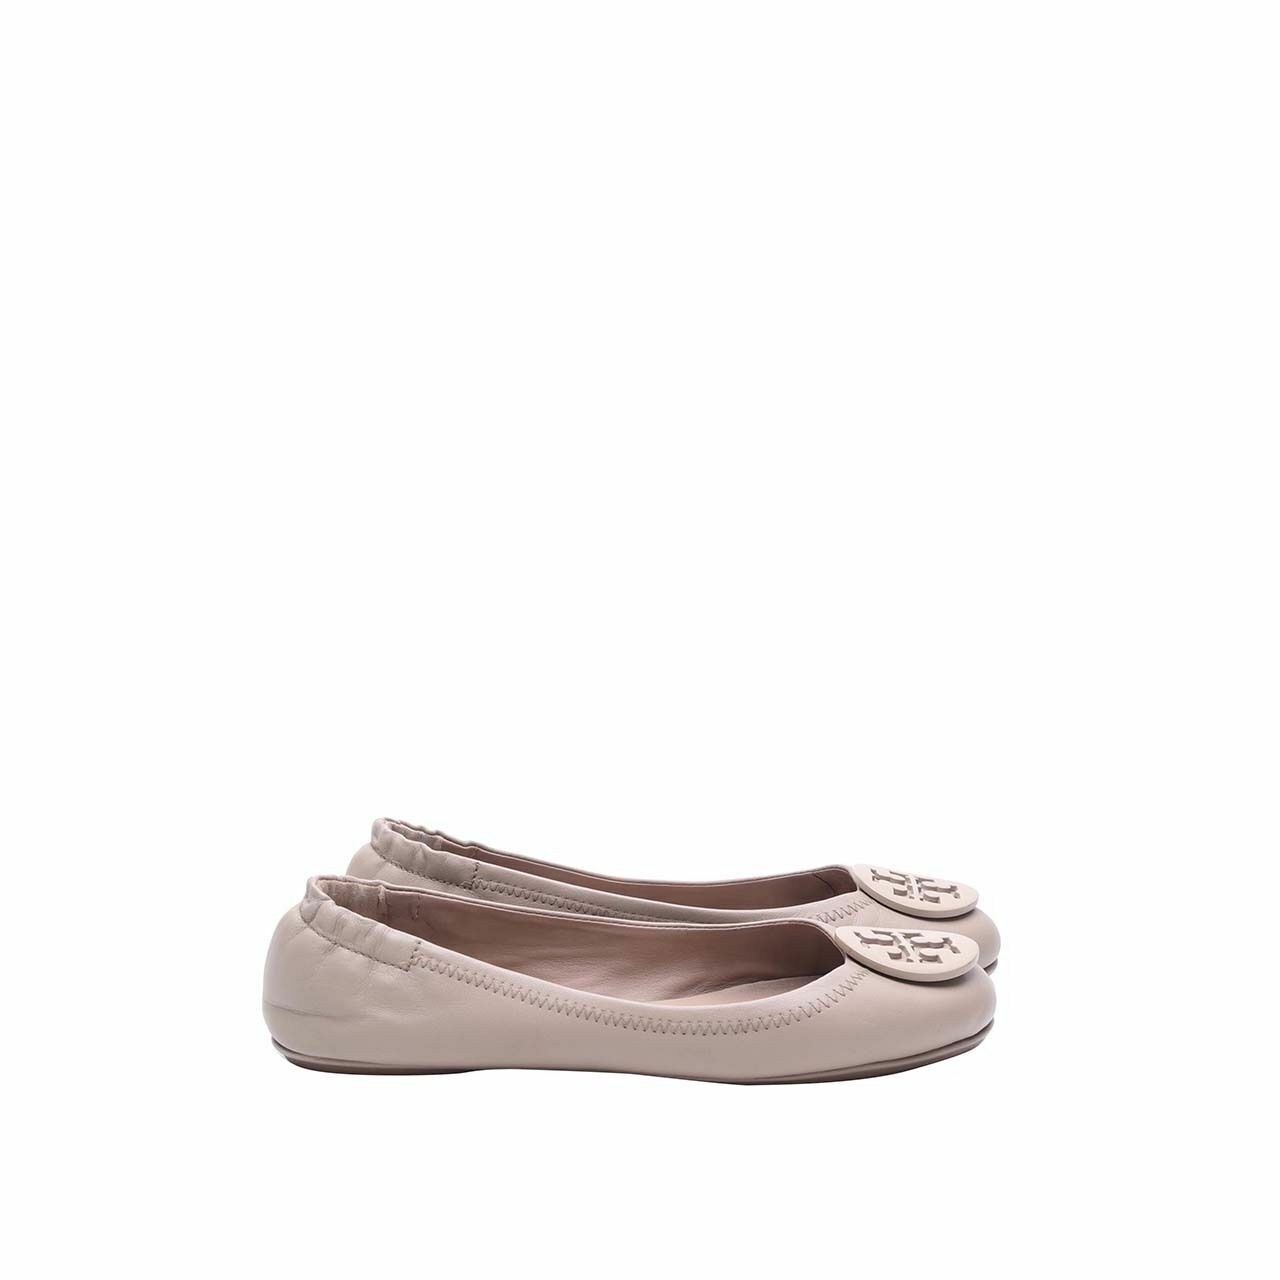 Tory Burch Minnie Travel Ballet With Logo Nappa Leather Flats